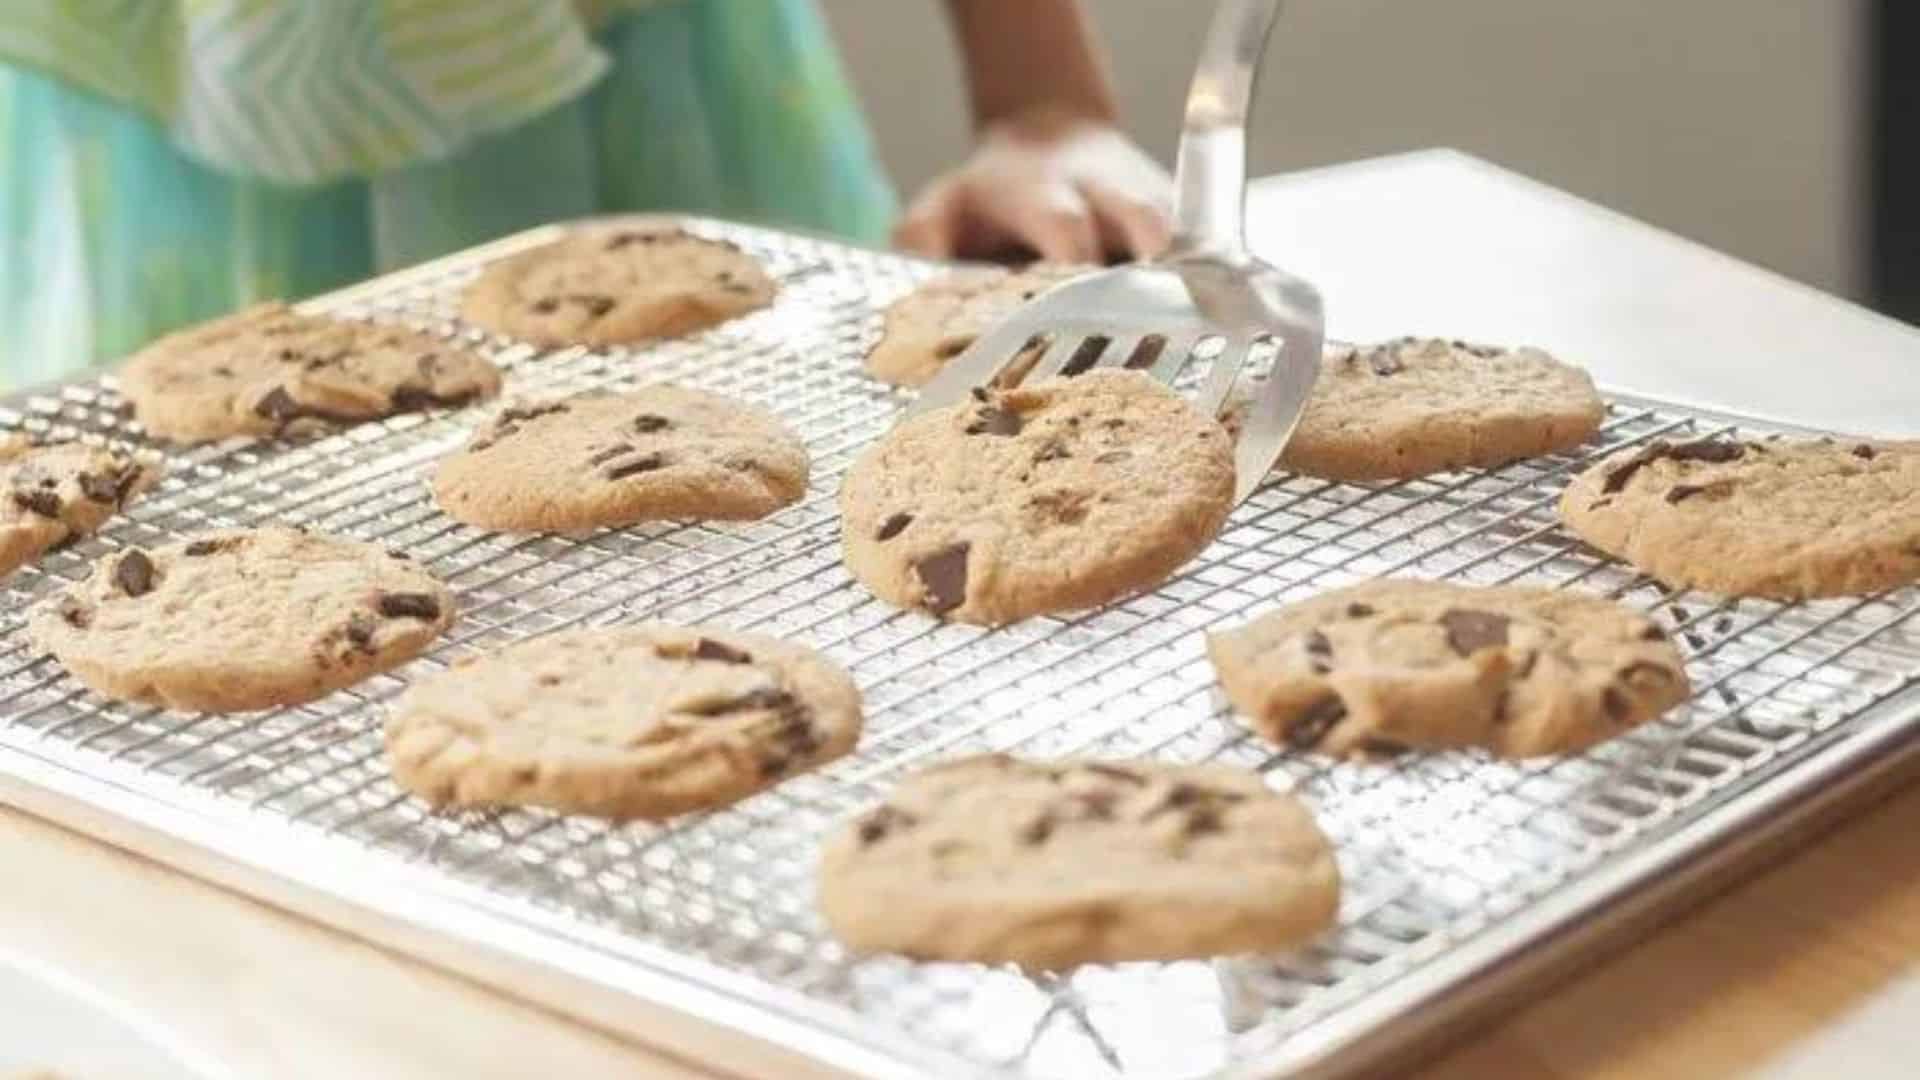 The 4 Best Cooling Racks in 2023